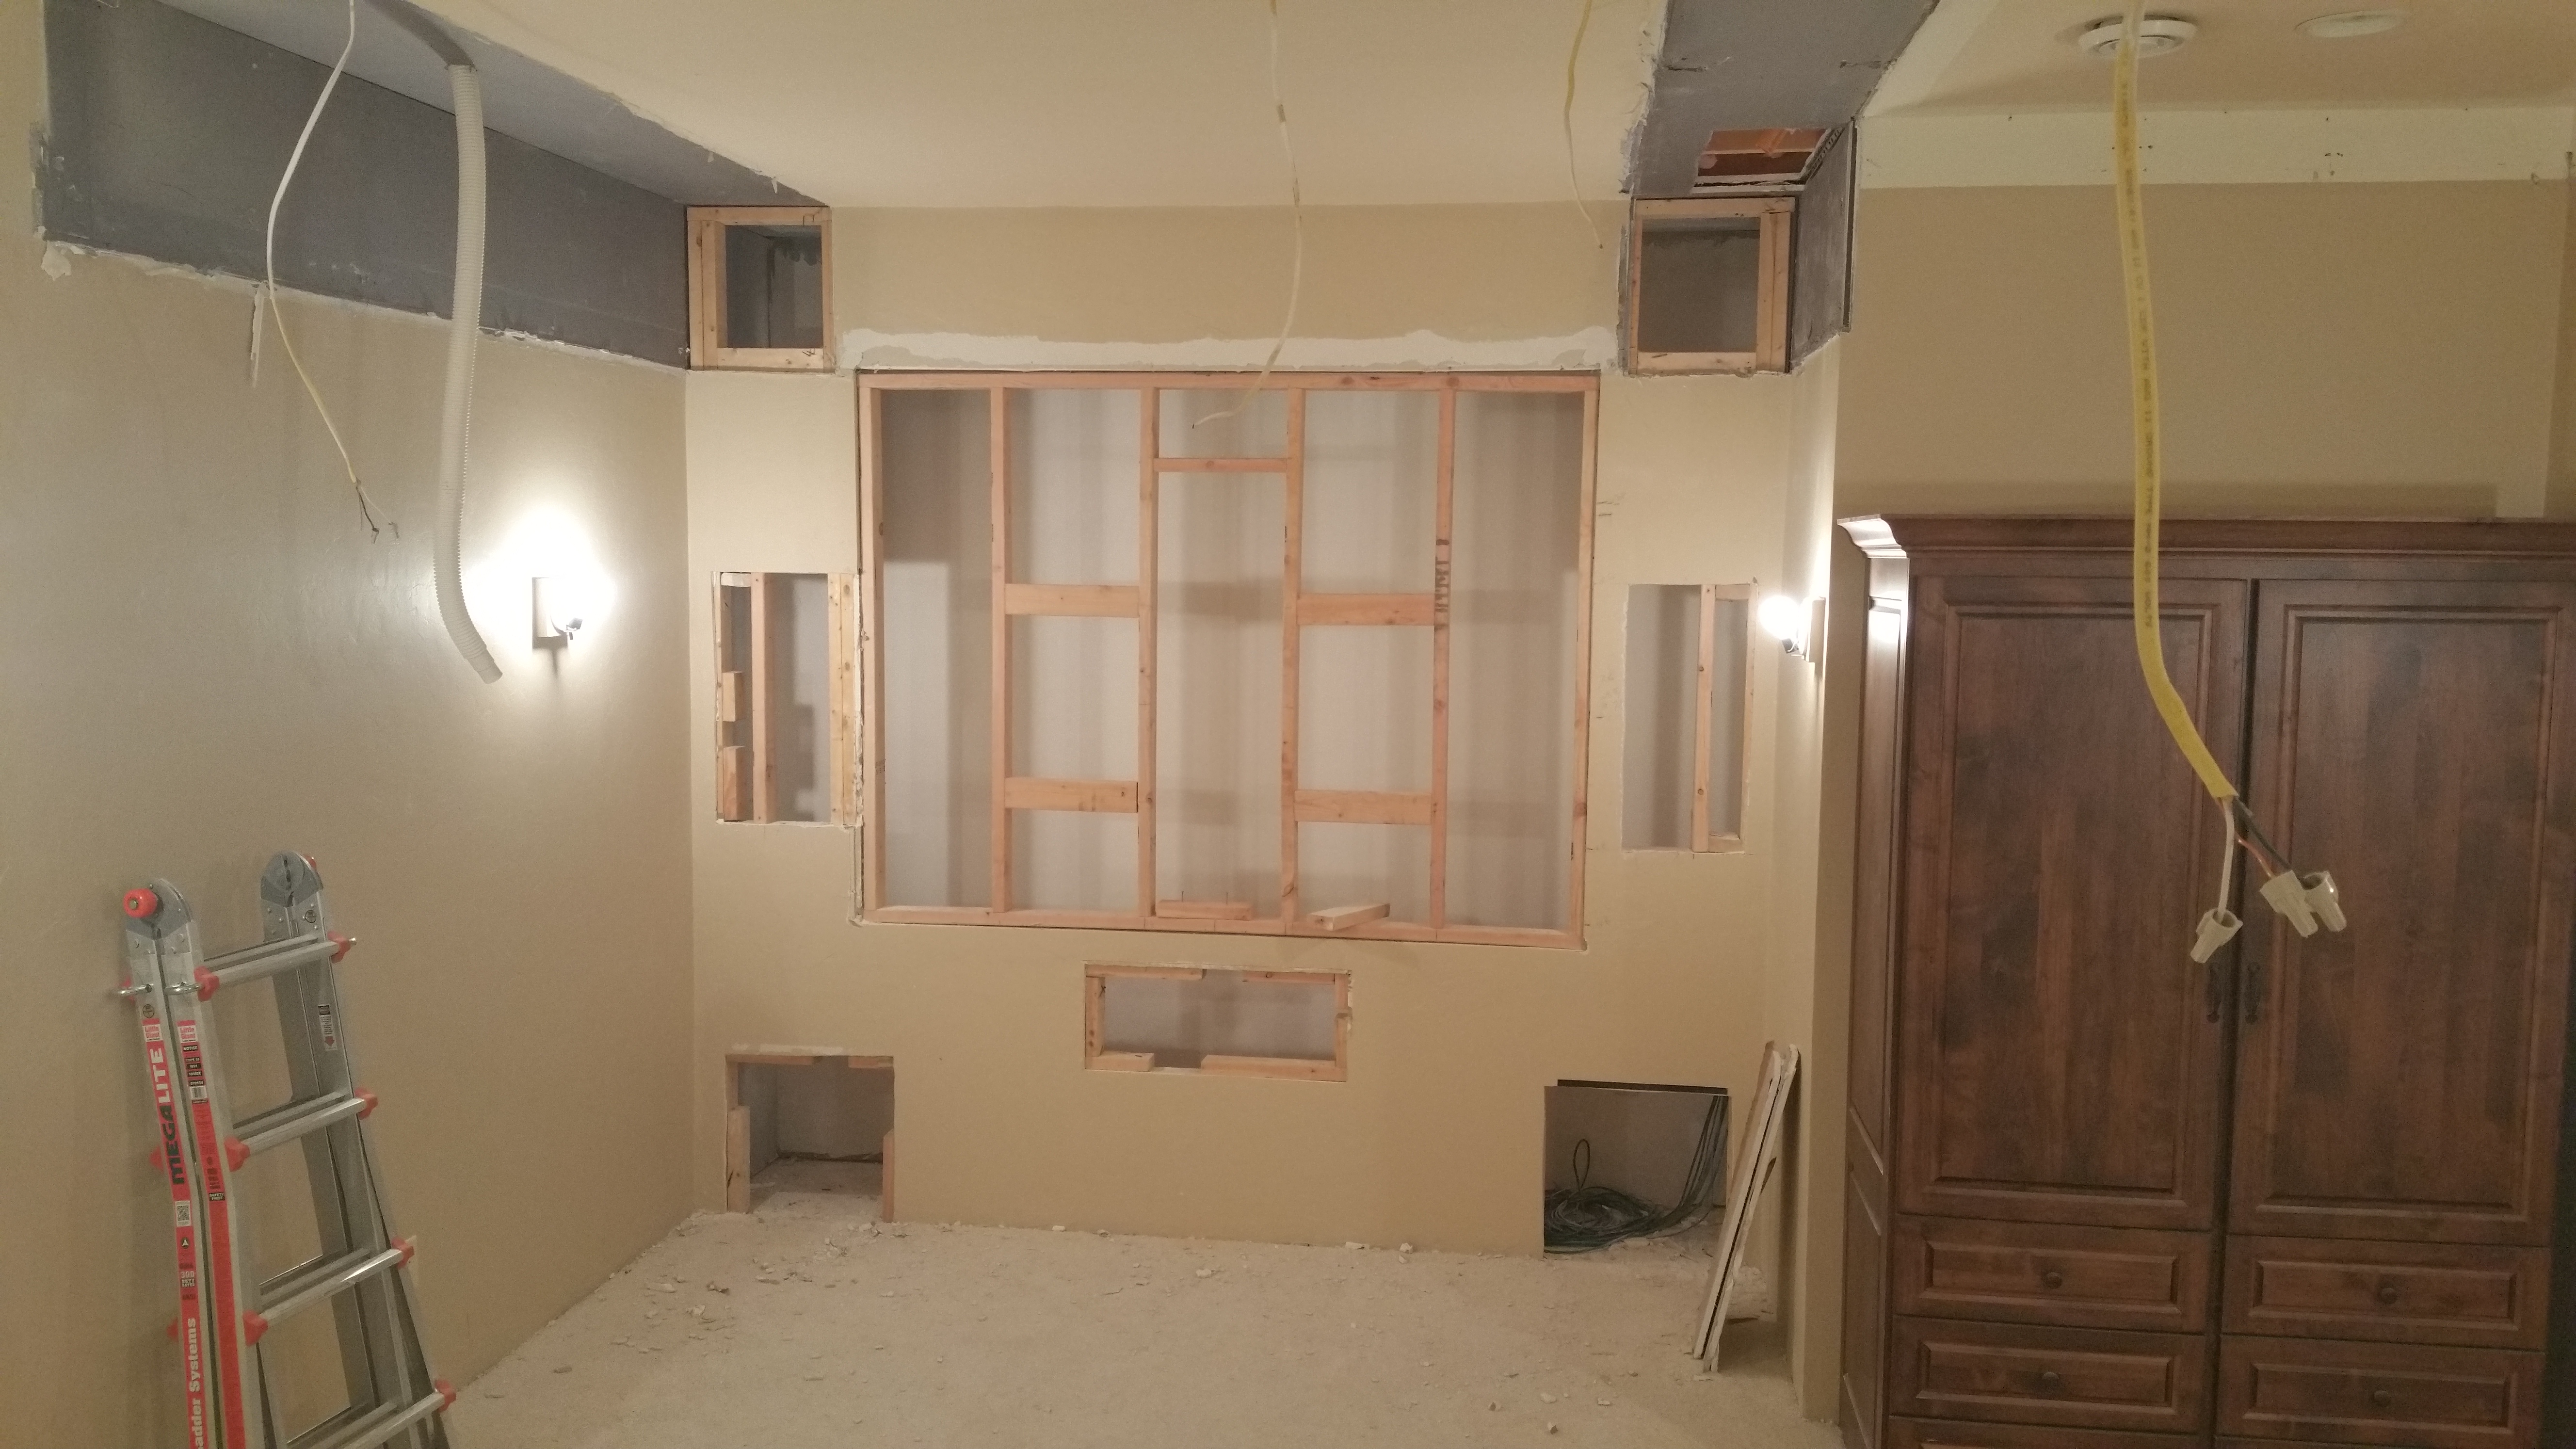 Home Theater Construction